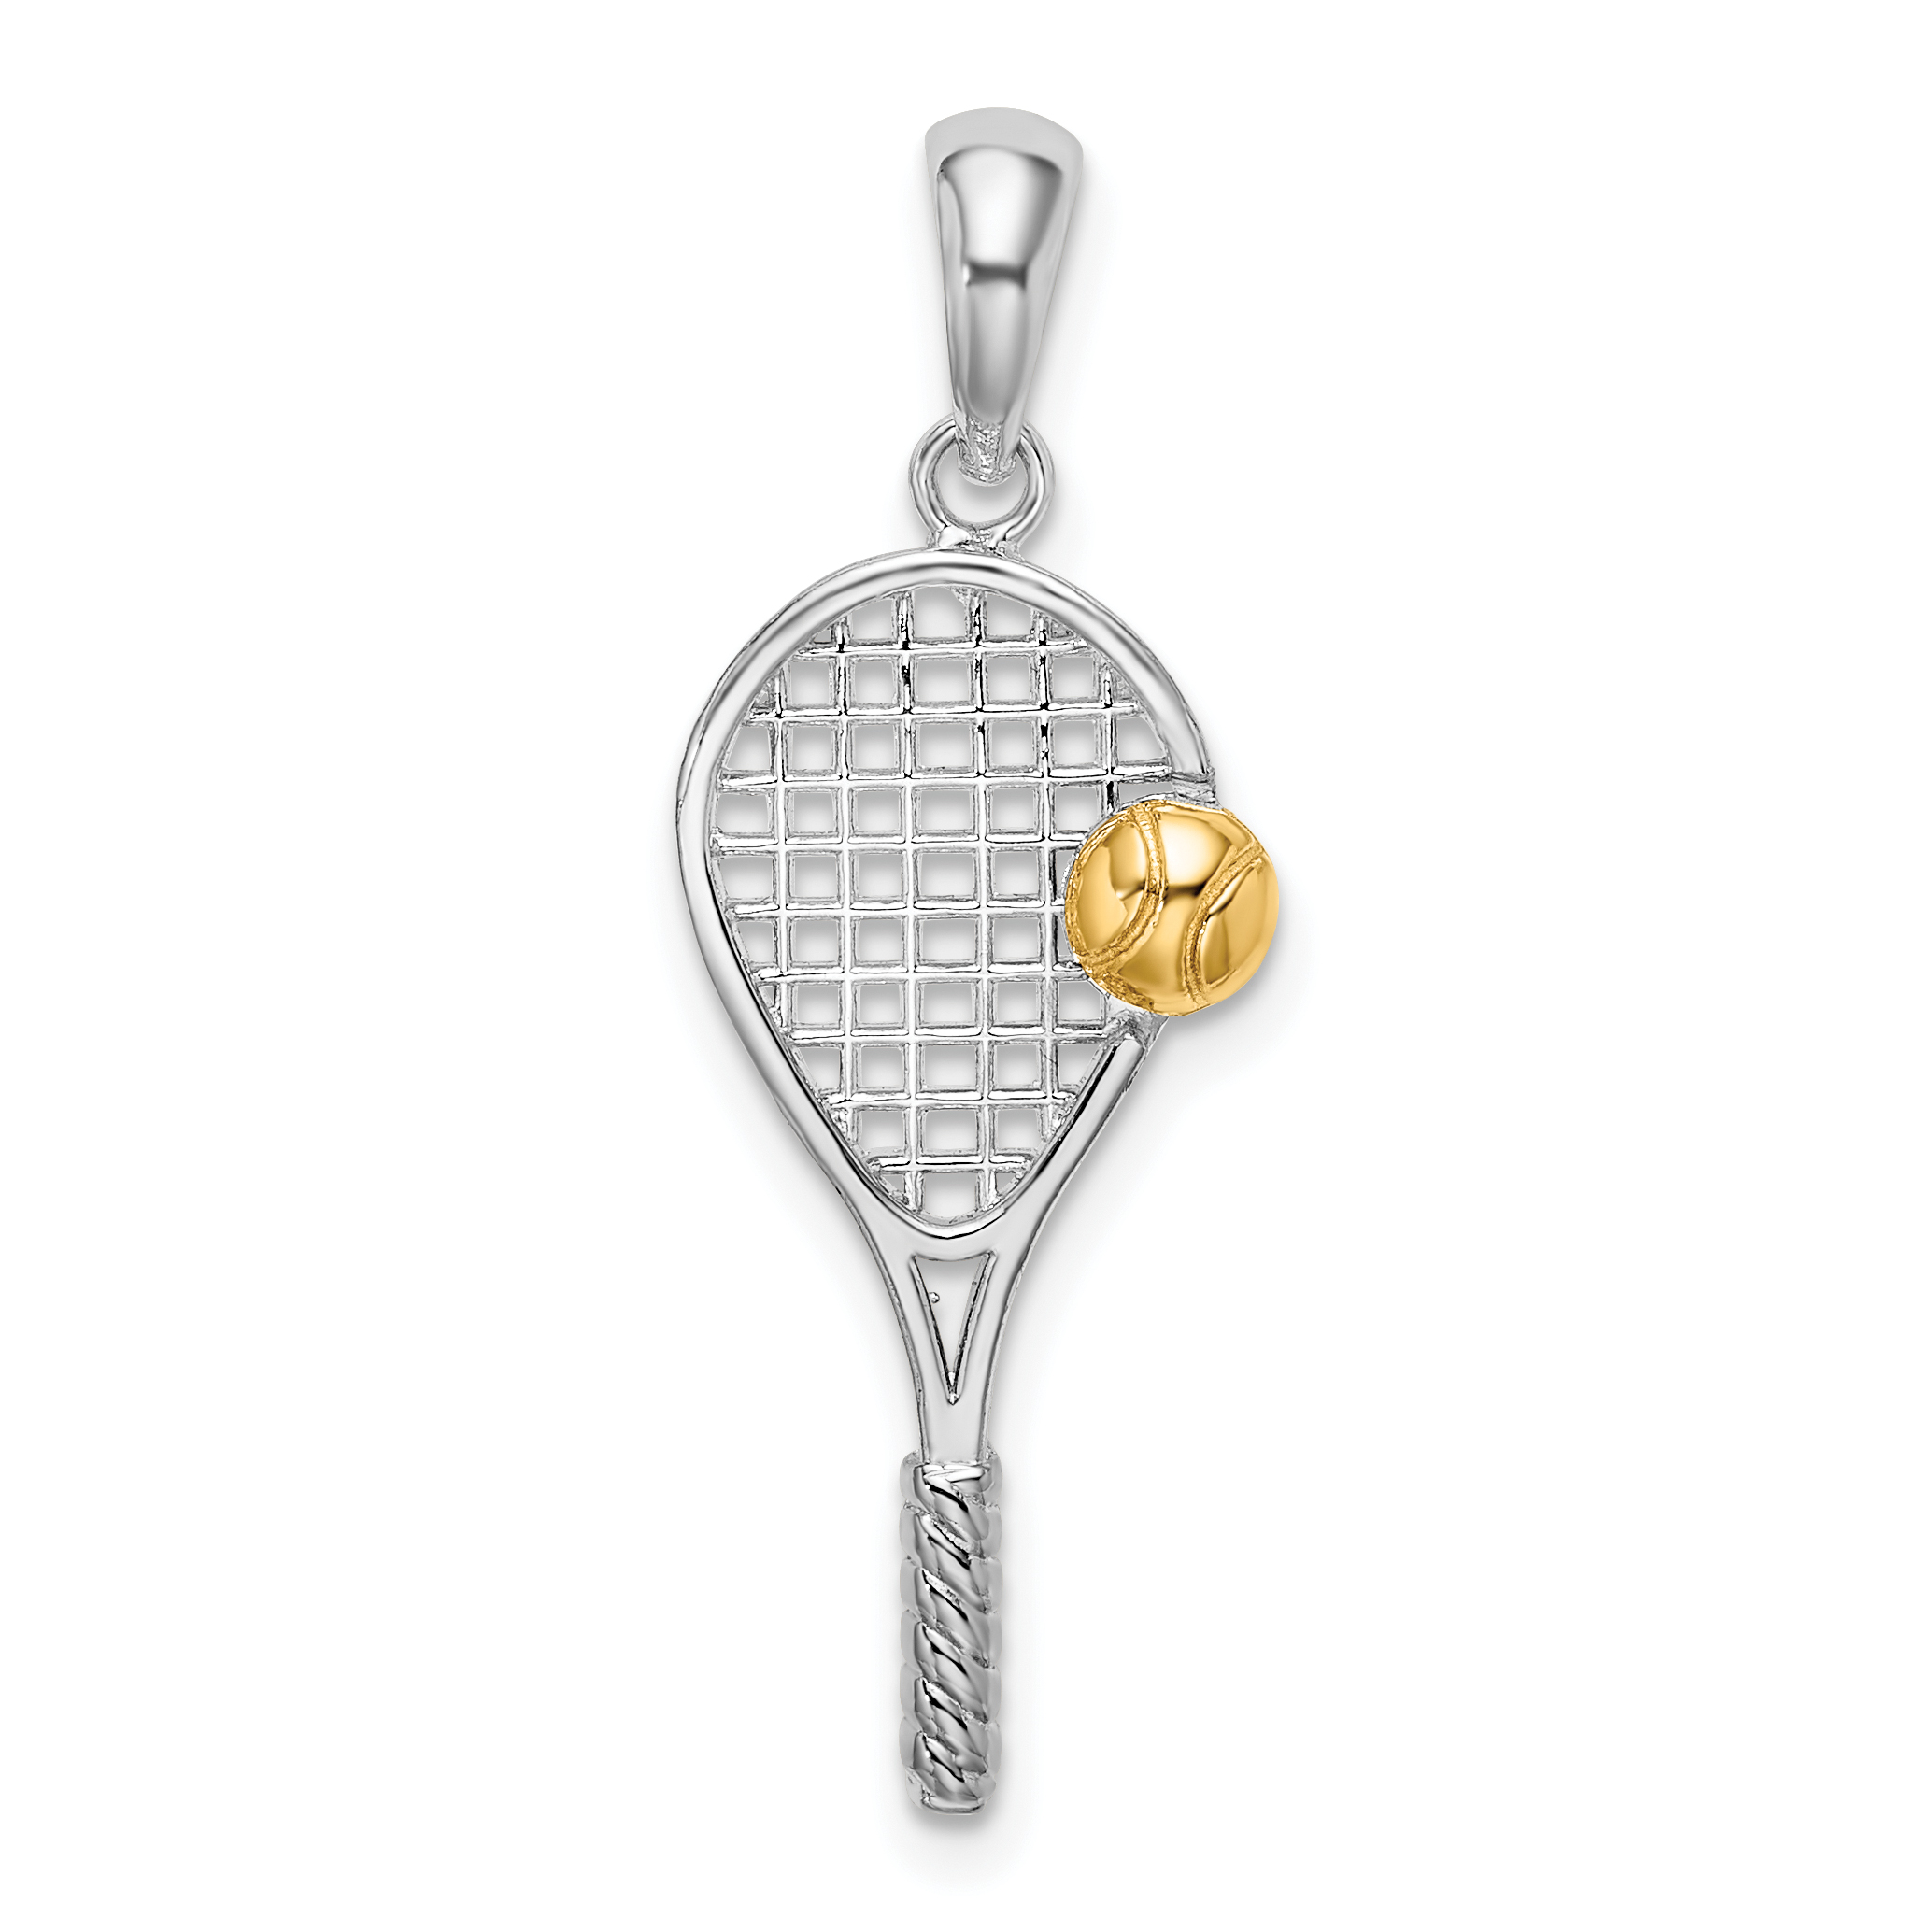 De-Ani Sterling Silver Rhodium-Plated Polished Tennis Racquet with